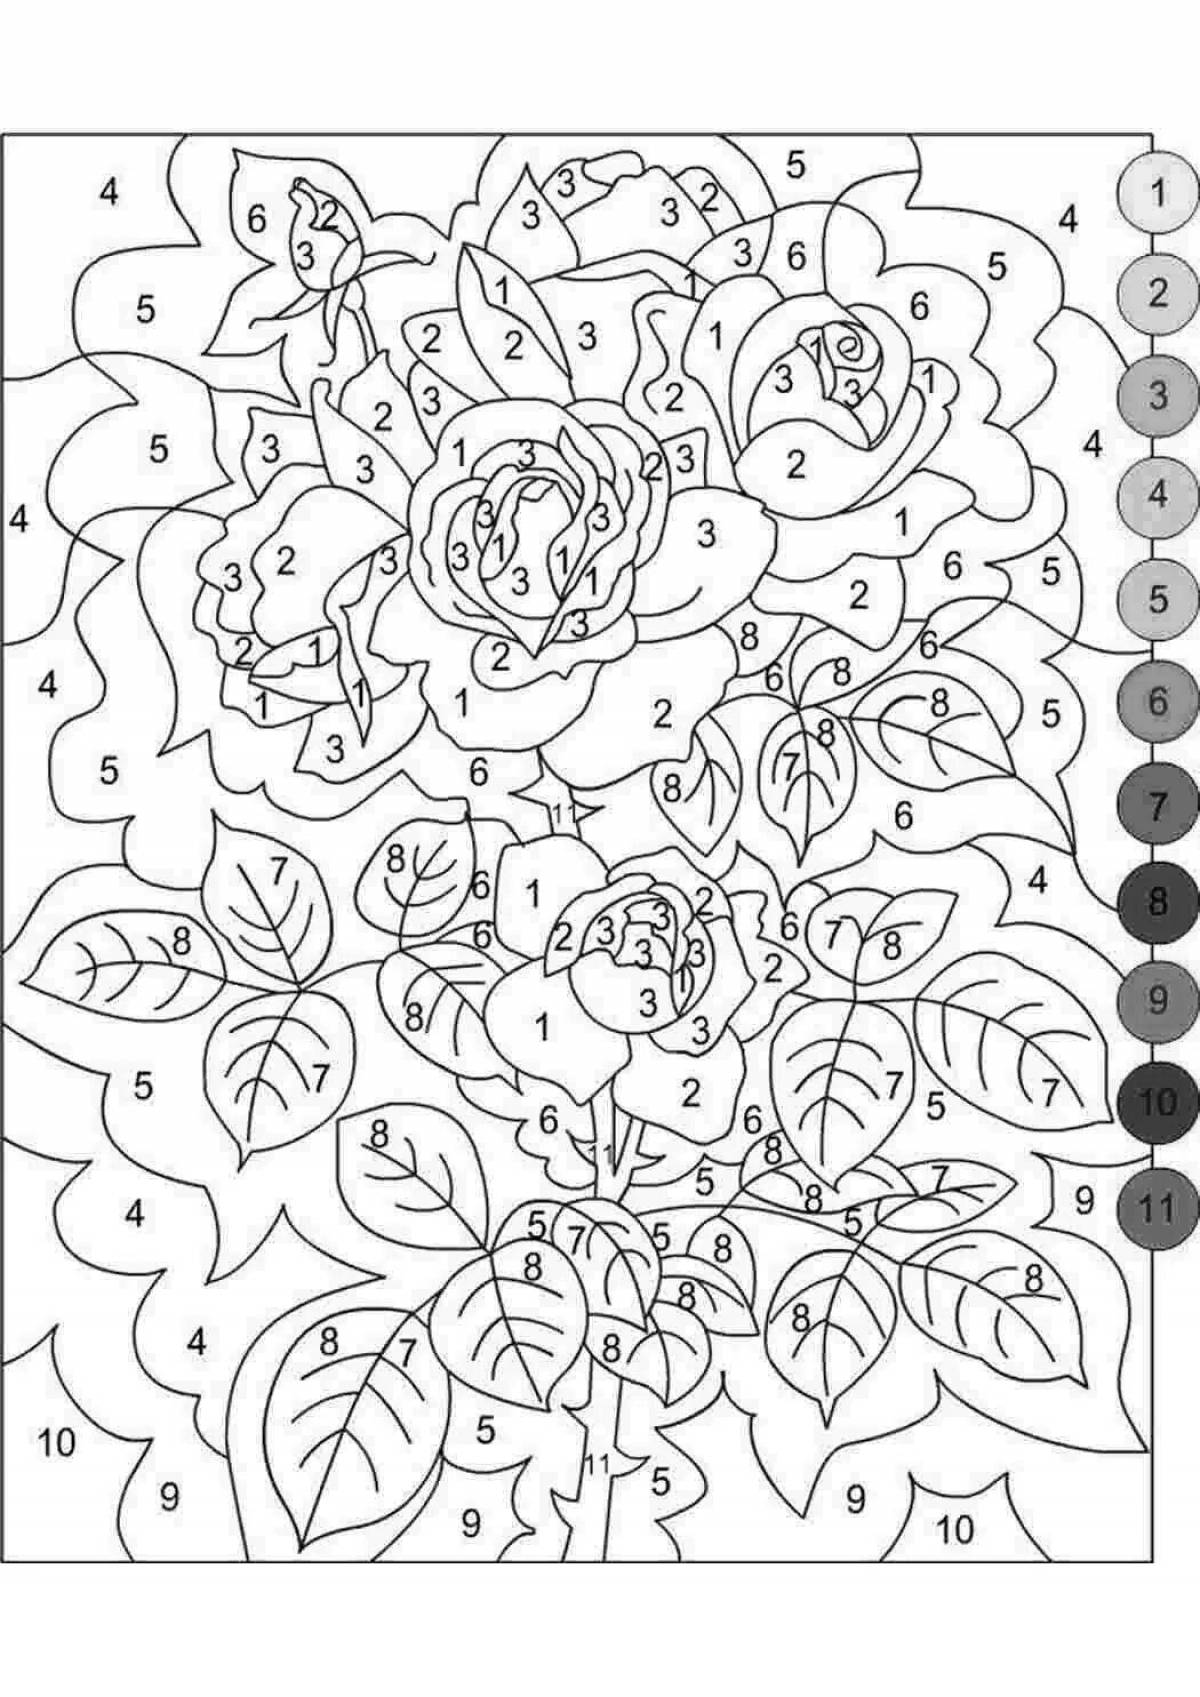 Coloring shining flower by numbers